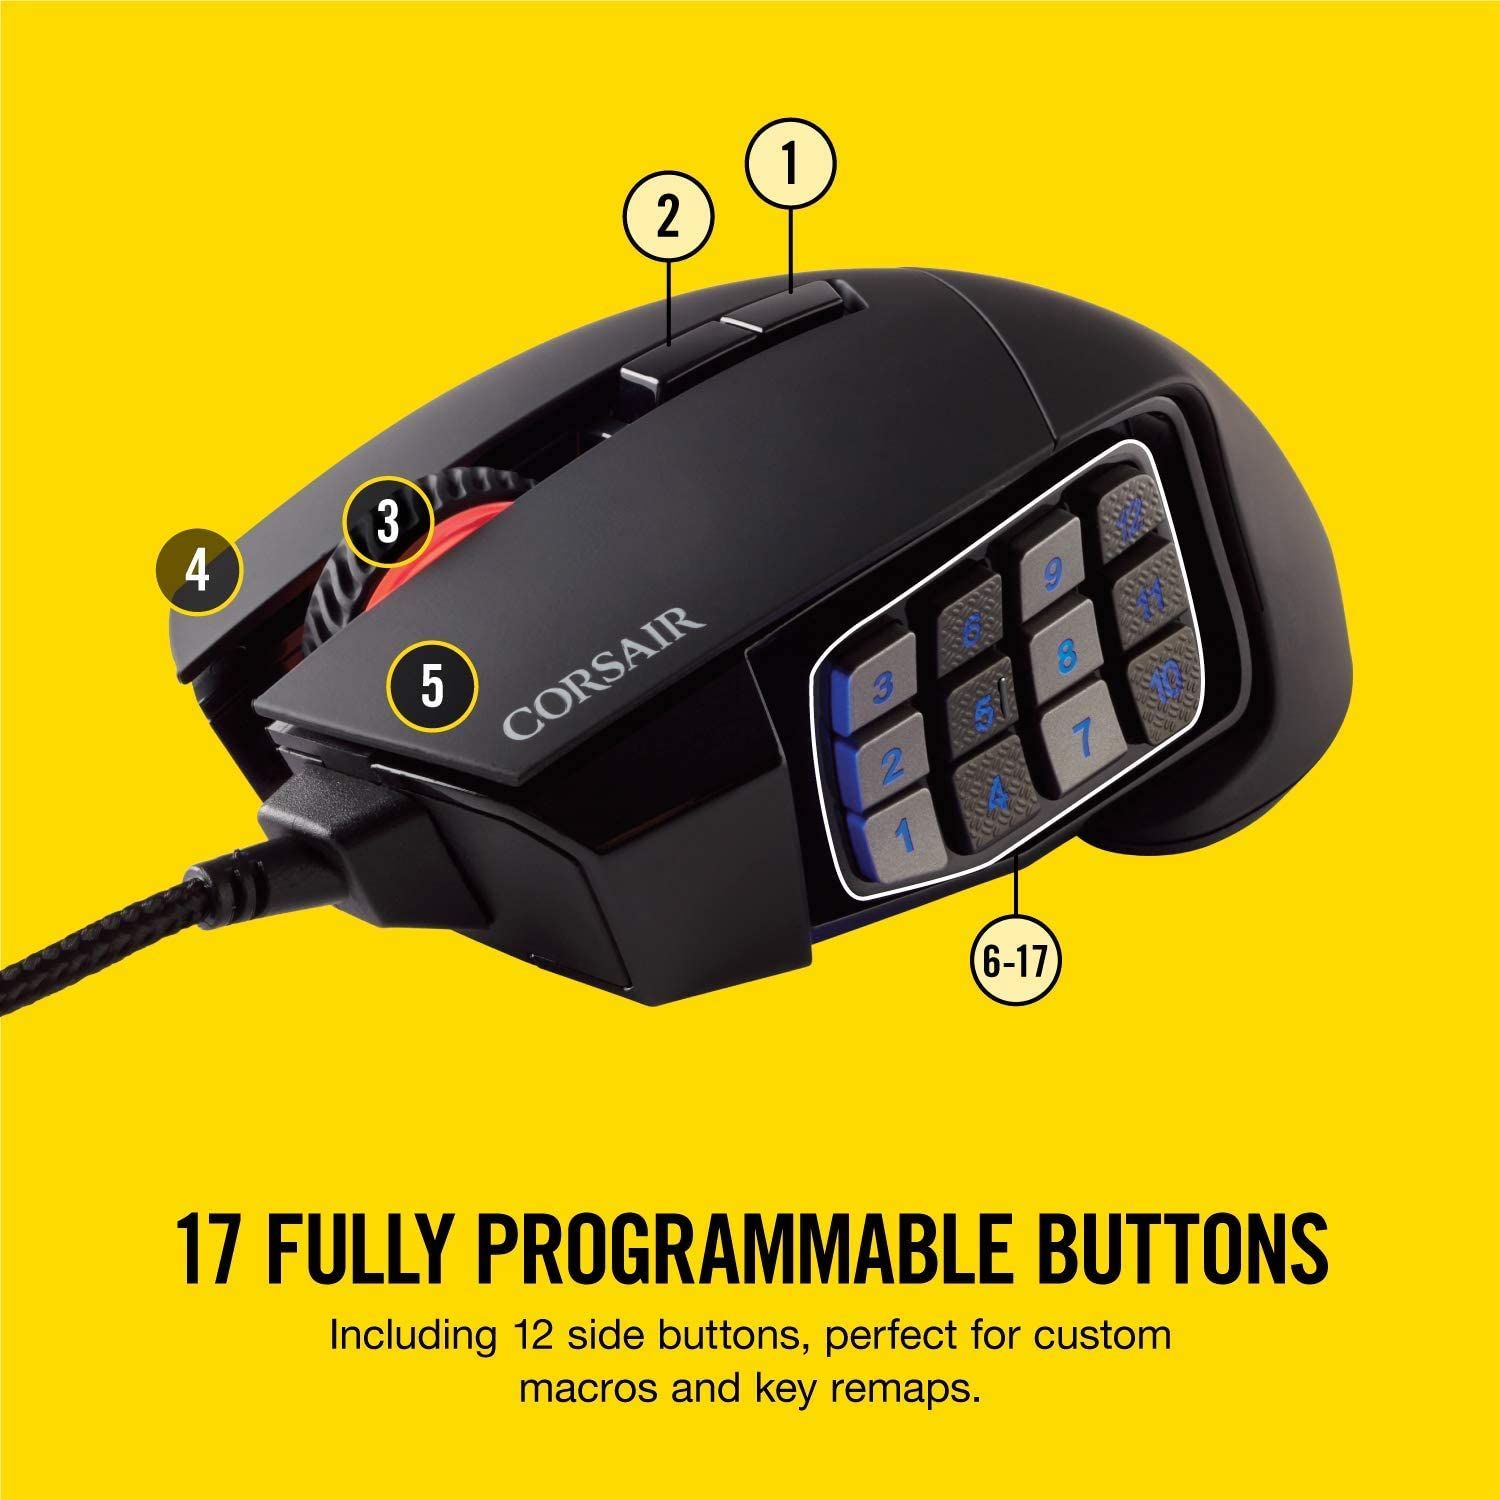 the corsair scimitar pro featuring 12 extra buttons